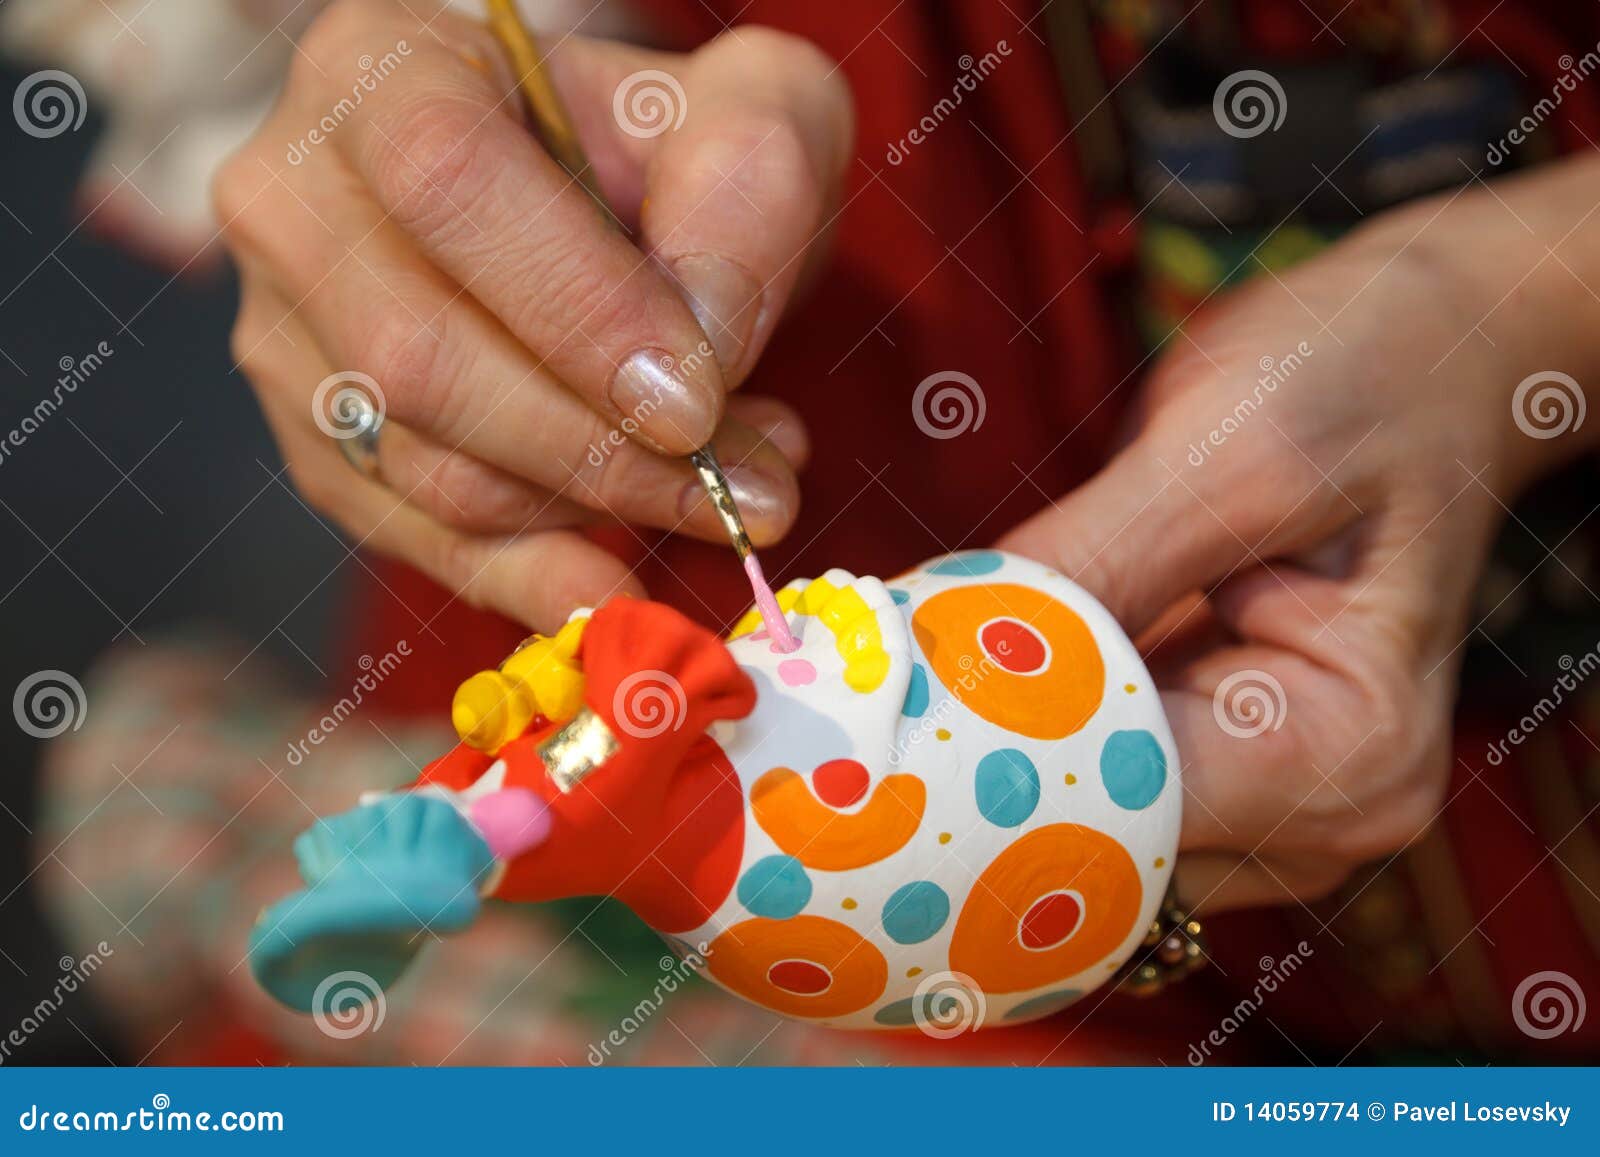 Painting Pottery Figurines. Russian Folk Craft. Stock Images - Image 